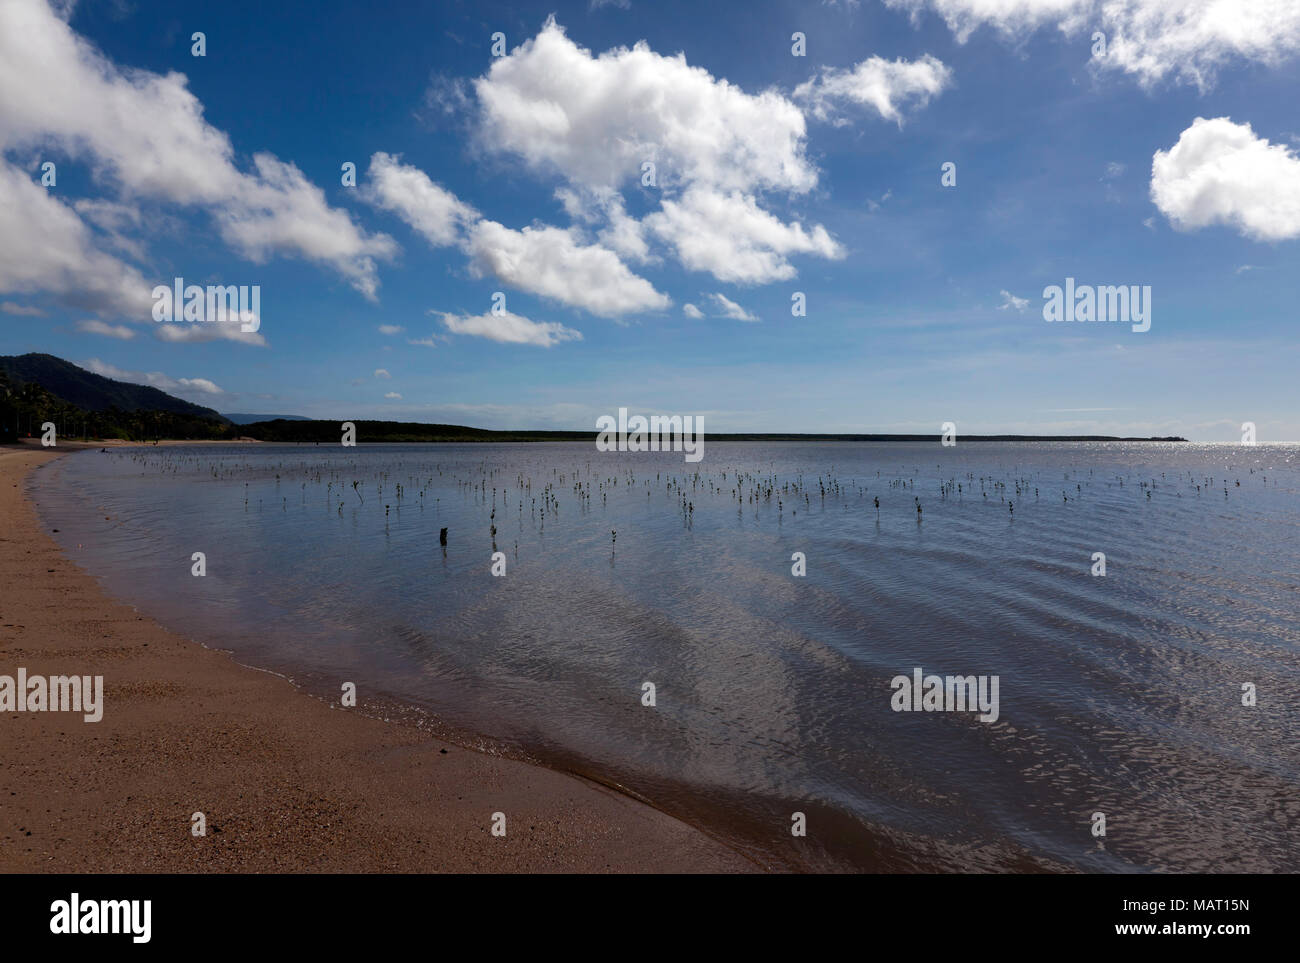 Wide-angle view of the beach at North Cairns, Far North Queensland, Australia, Stock Photo